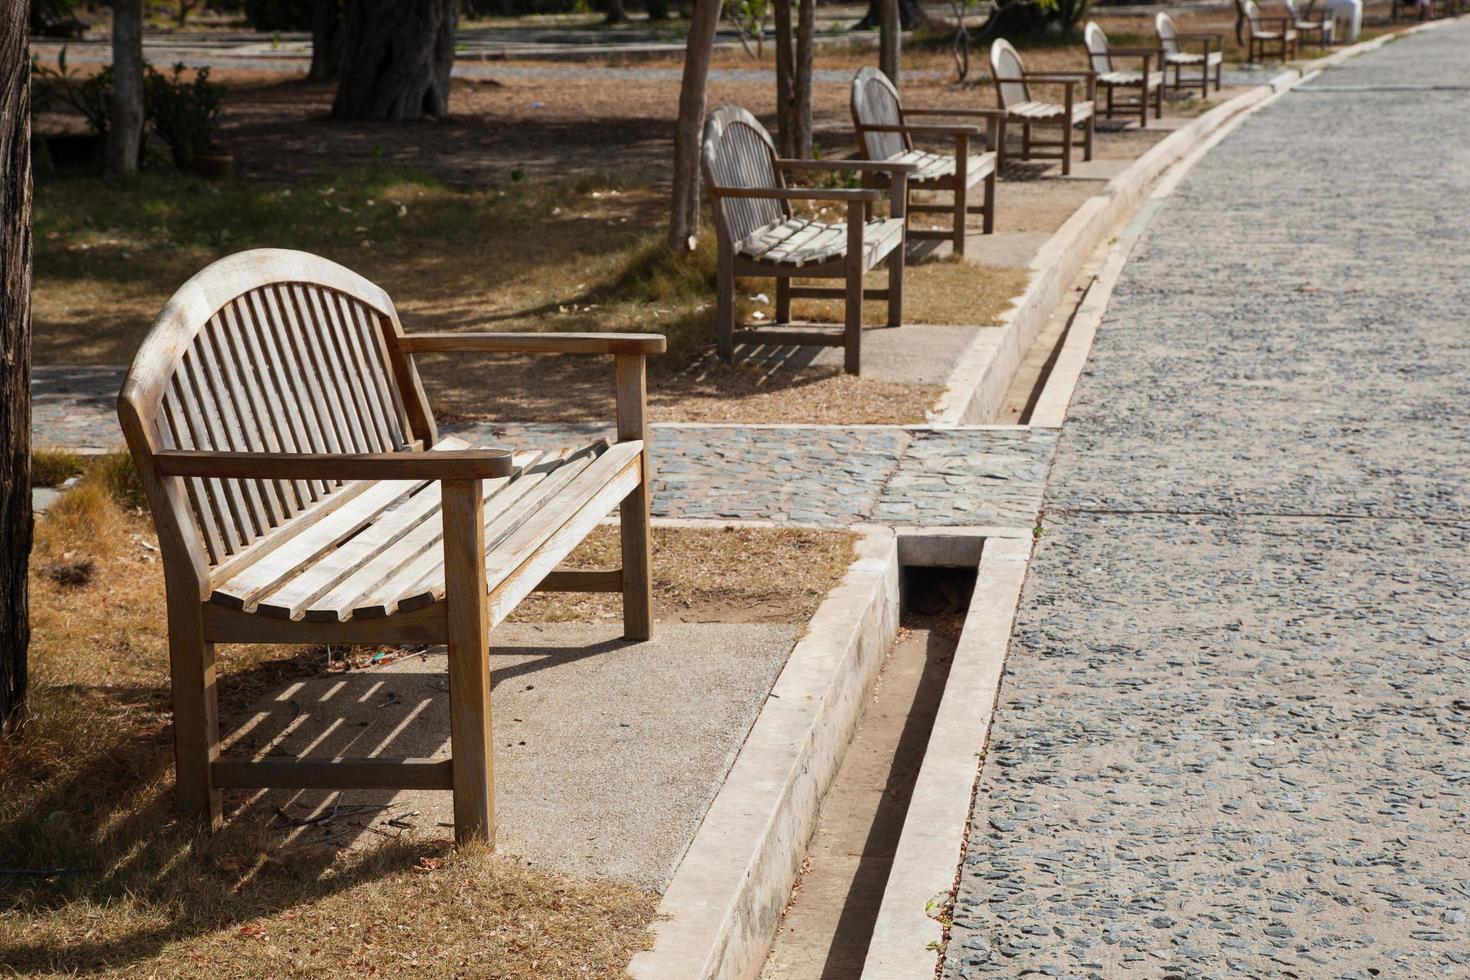 Wooden benches in the park photo